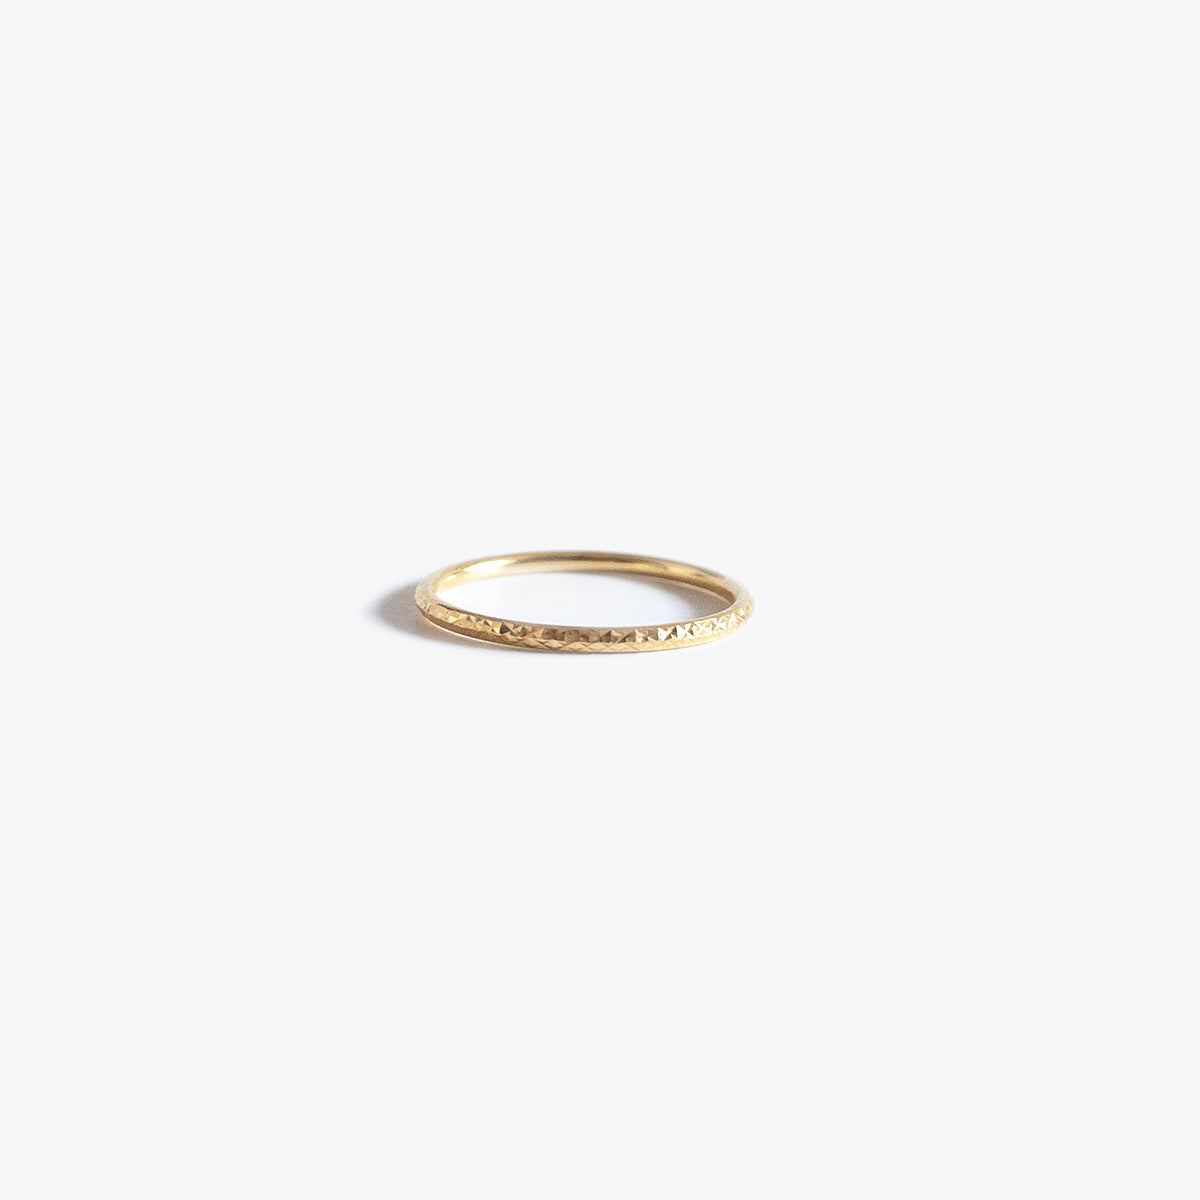 The Textured Ophidian Ring in Solid Gold